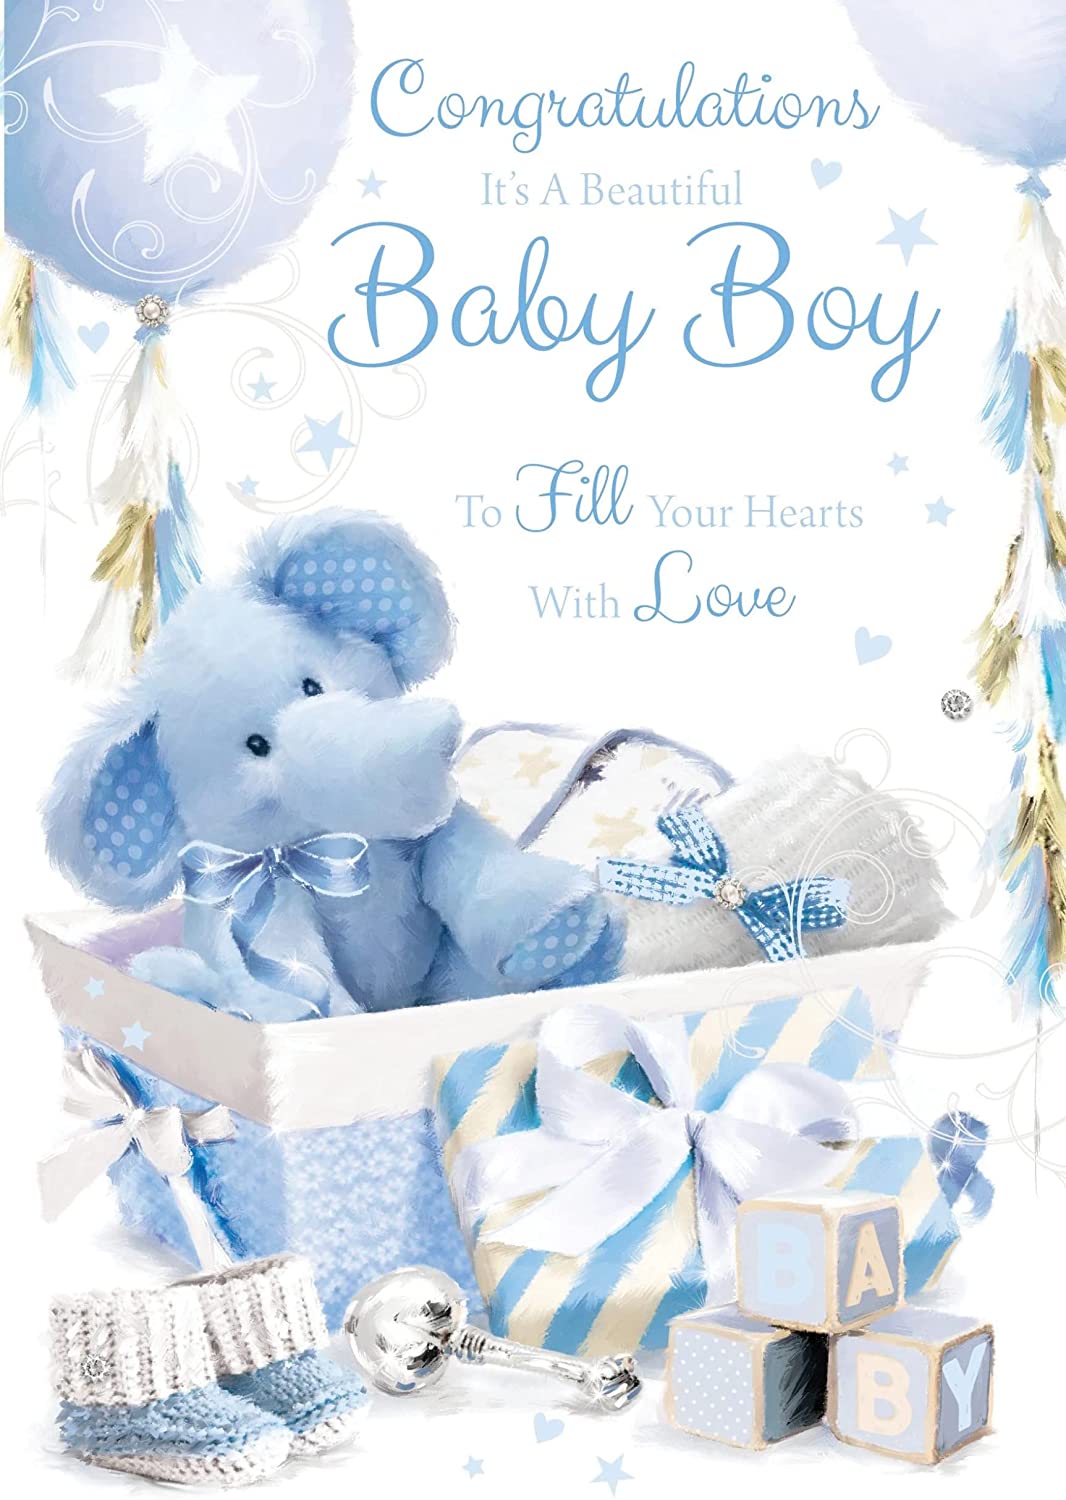 New Baby Boy Card - Joyous Baby Gifts And Balloons